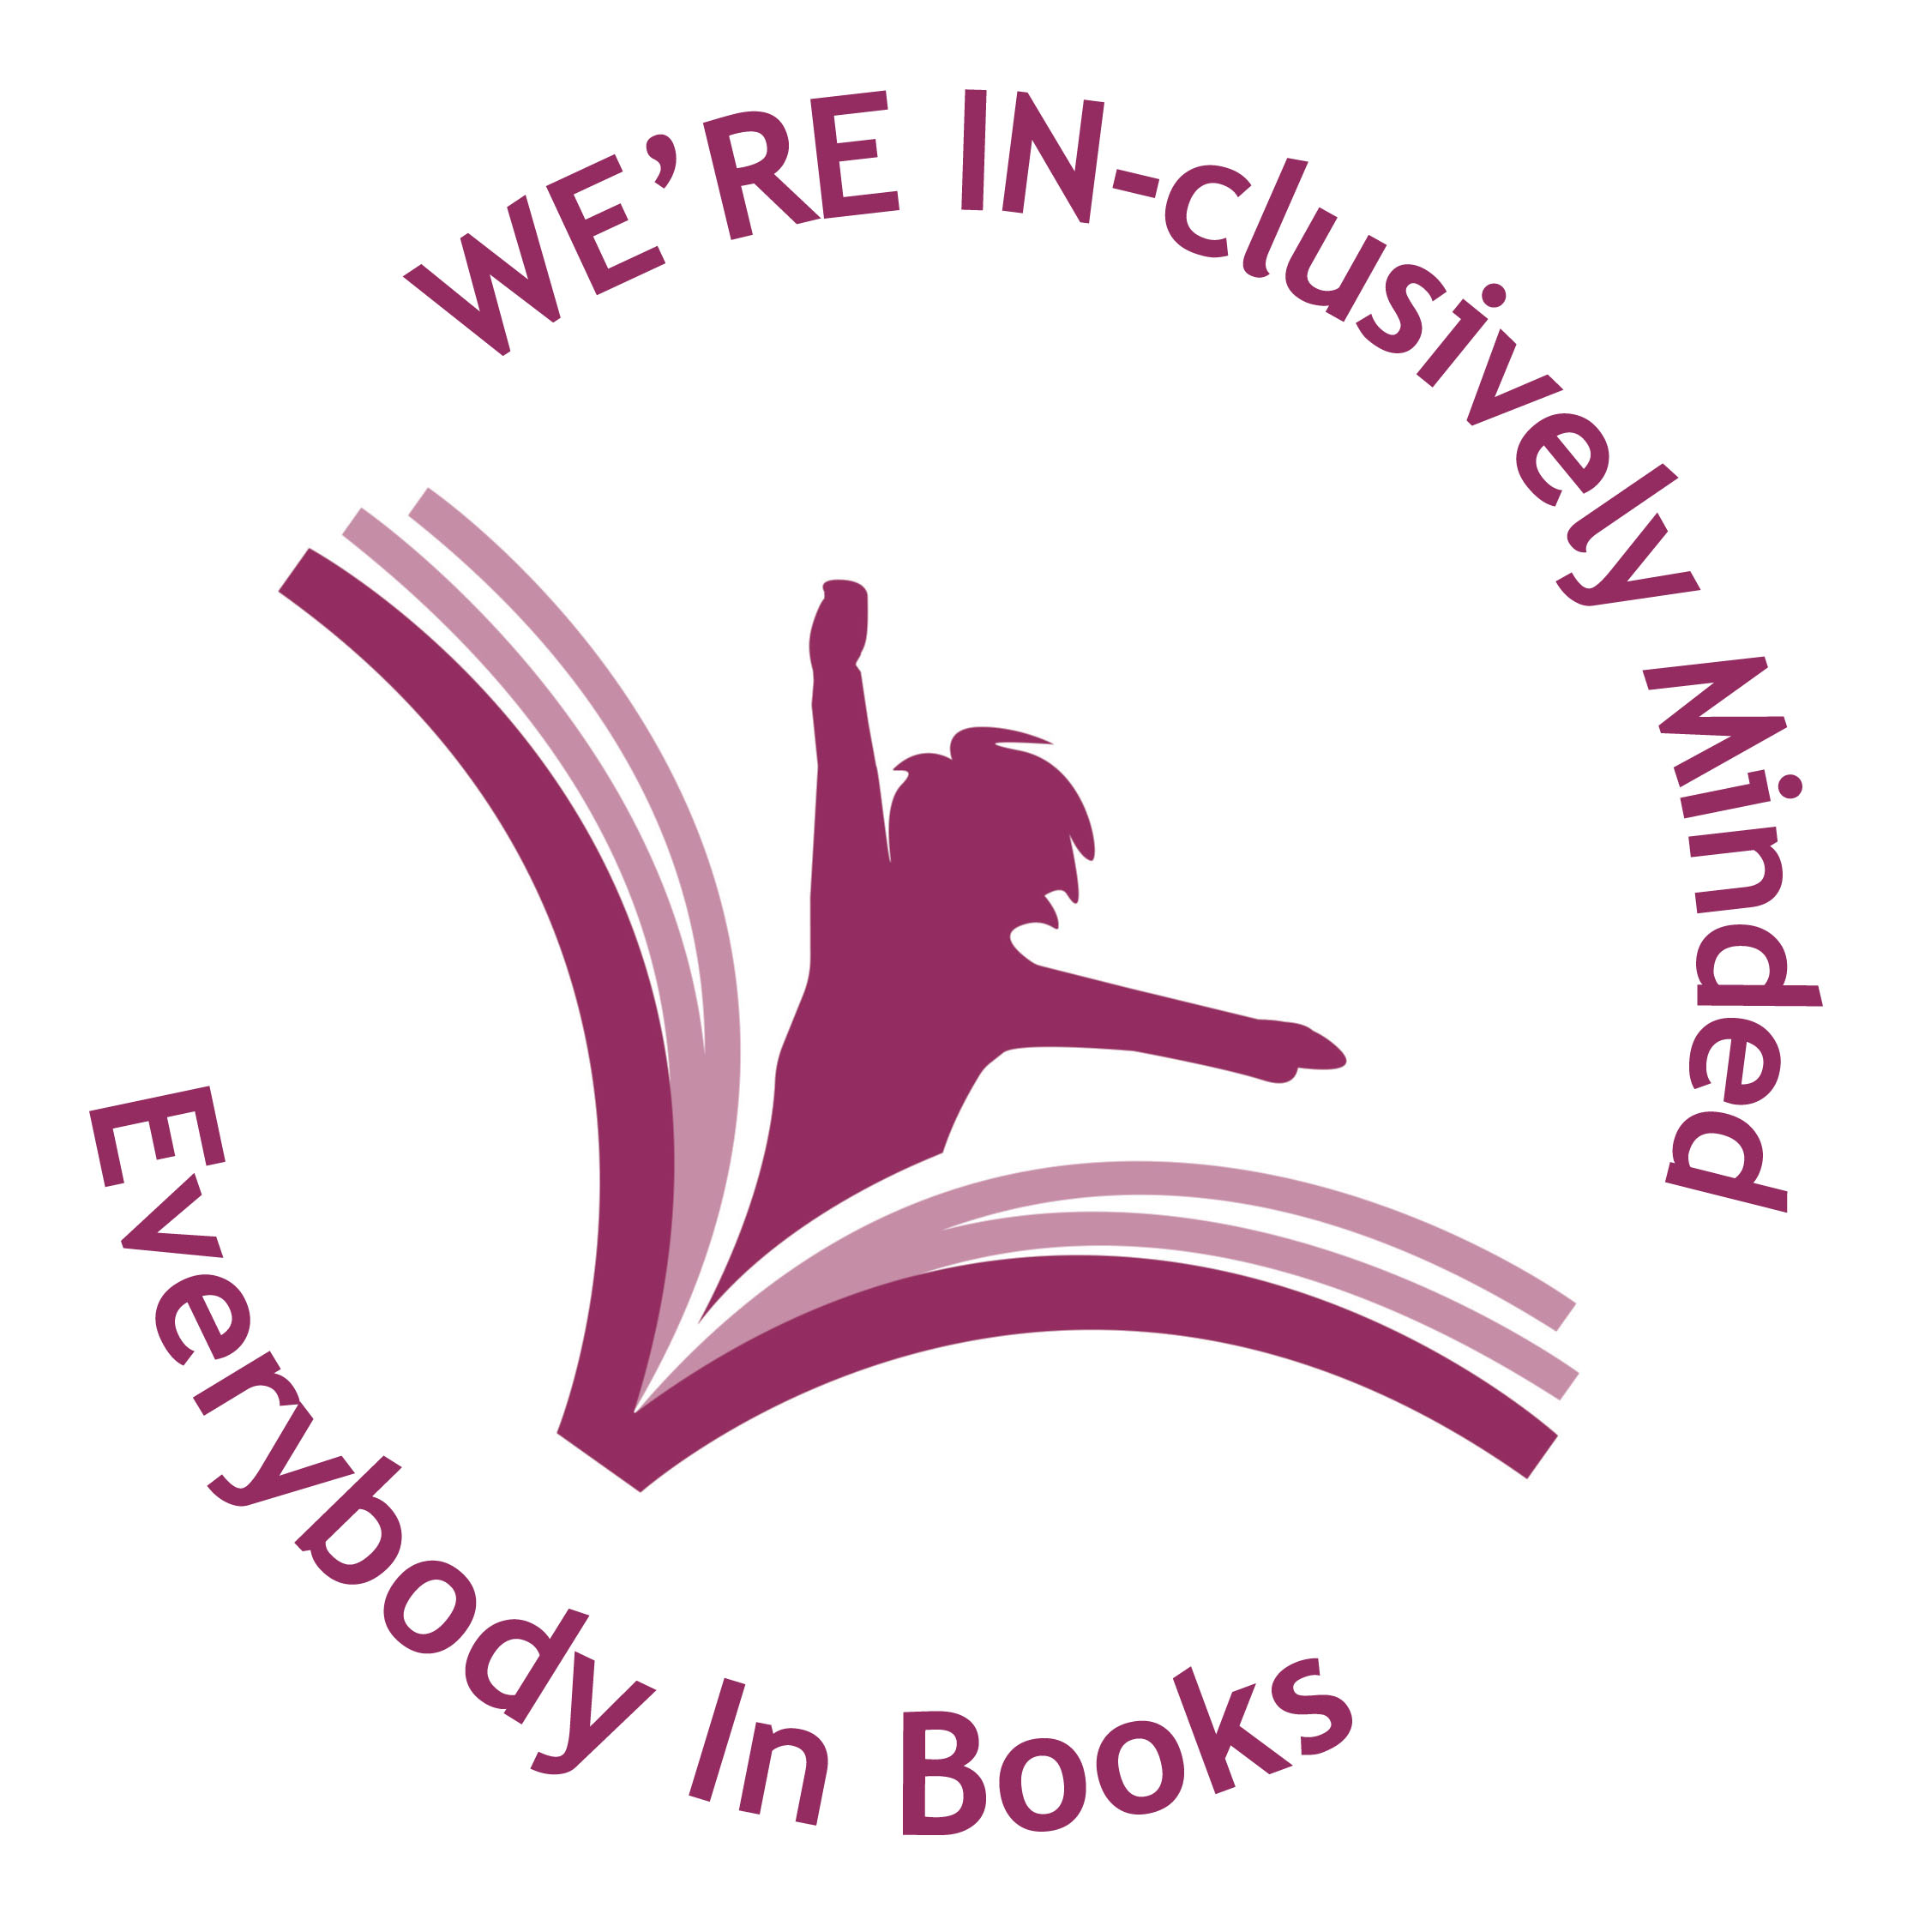 Libraries - guidance on inclusion and diversity